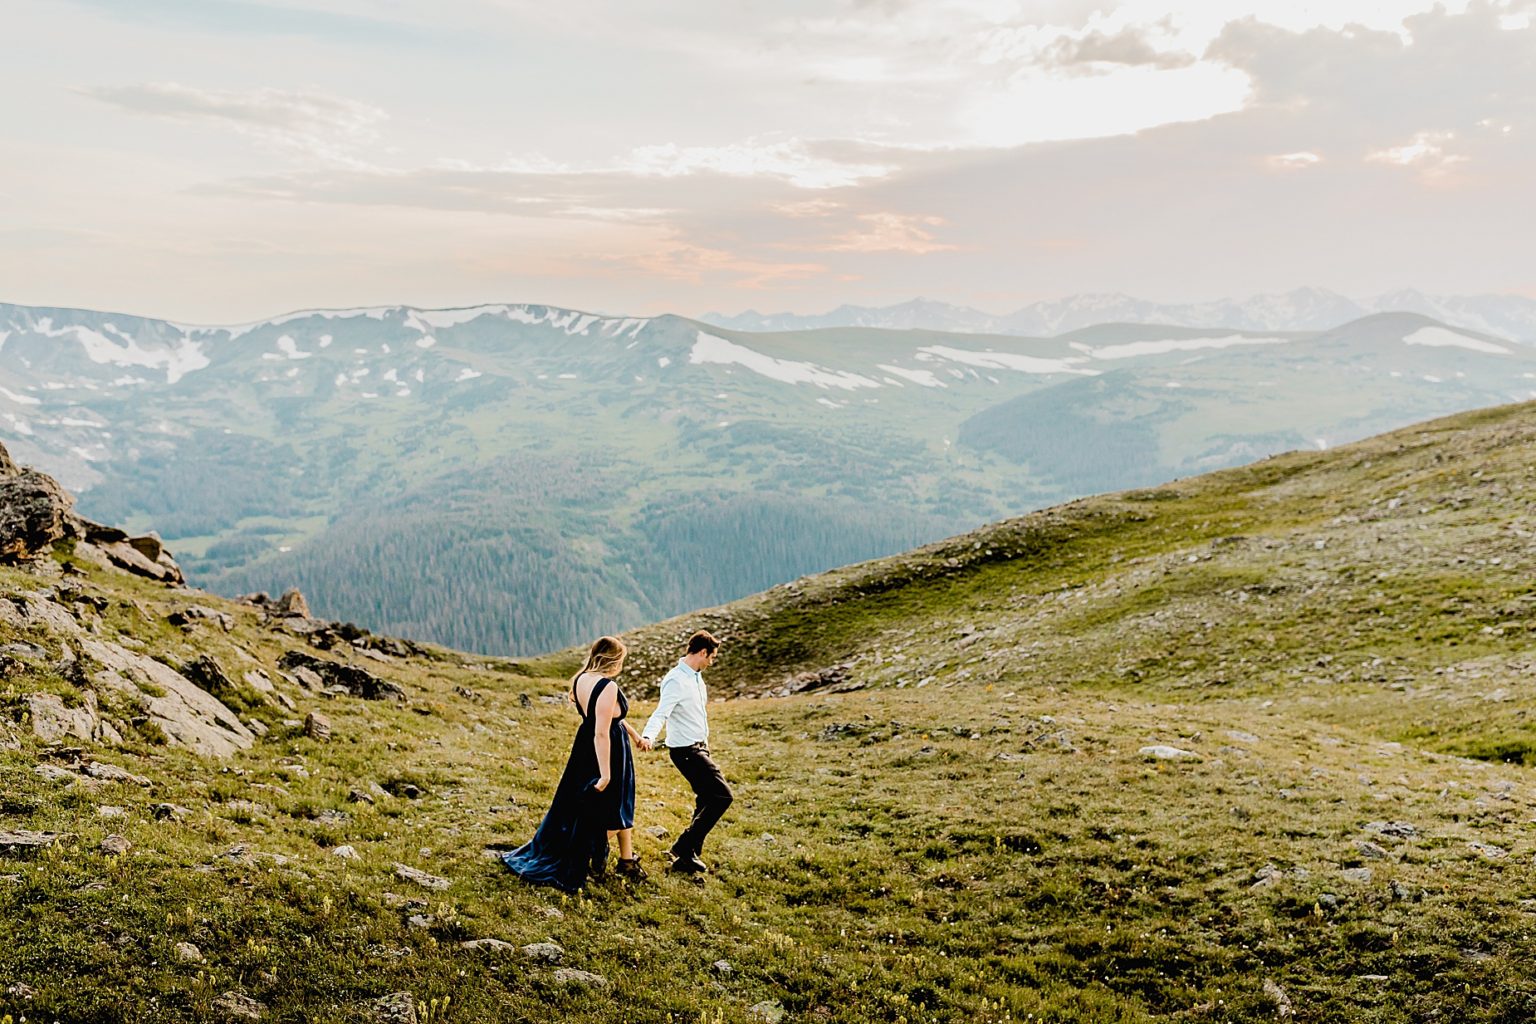 couple hiking down mountain together in their nice attire and hiking shoes with gorgeous mountain backdrop